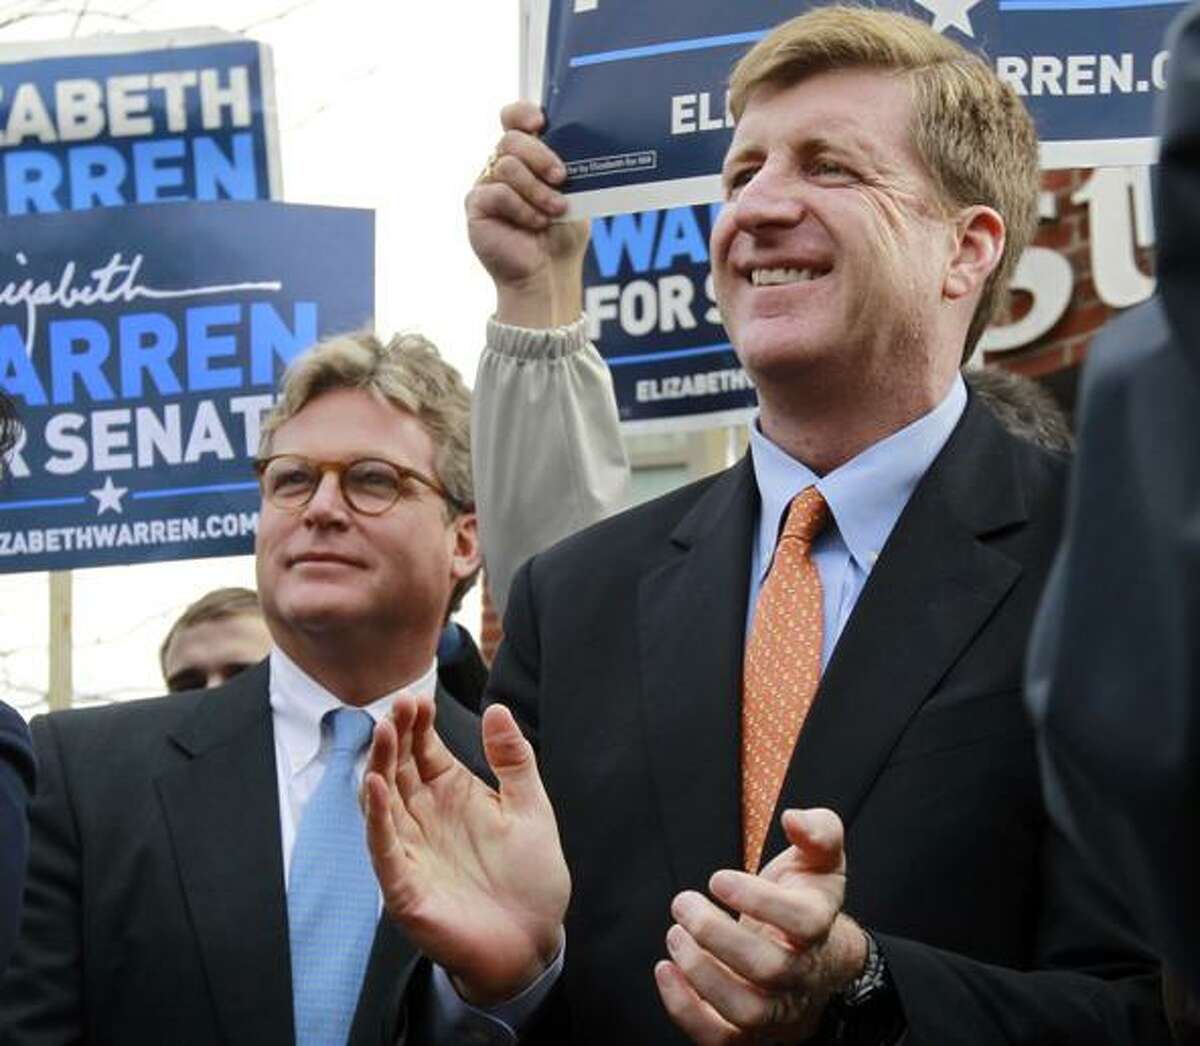 Edward M. Kennedy, Jr., left, and former U.S. Rep. Patrick Kennedy, D-R.I., right, both sons of the late U.S. Sen. Edward M. Kennedy, D-Mass., attend a campaign event for Democratic candidate for the U.S. Senate Elizabeth Warren, not shown, in the Dorchester neighborhood of Boston Monday, Nov. 5, 2012. Both Warren and incumbent U.S. Sen. Scott Brown, R-Mass., continue their push around the state on the final day of campaigning before Election Day. (AP Photo/Steven Senne)